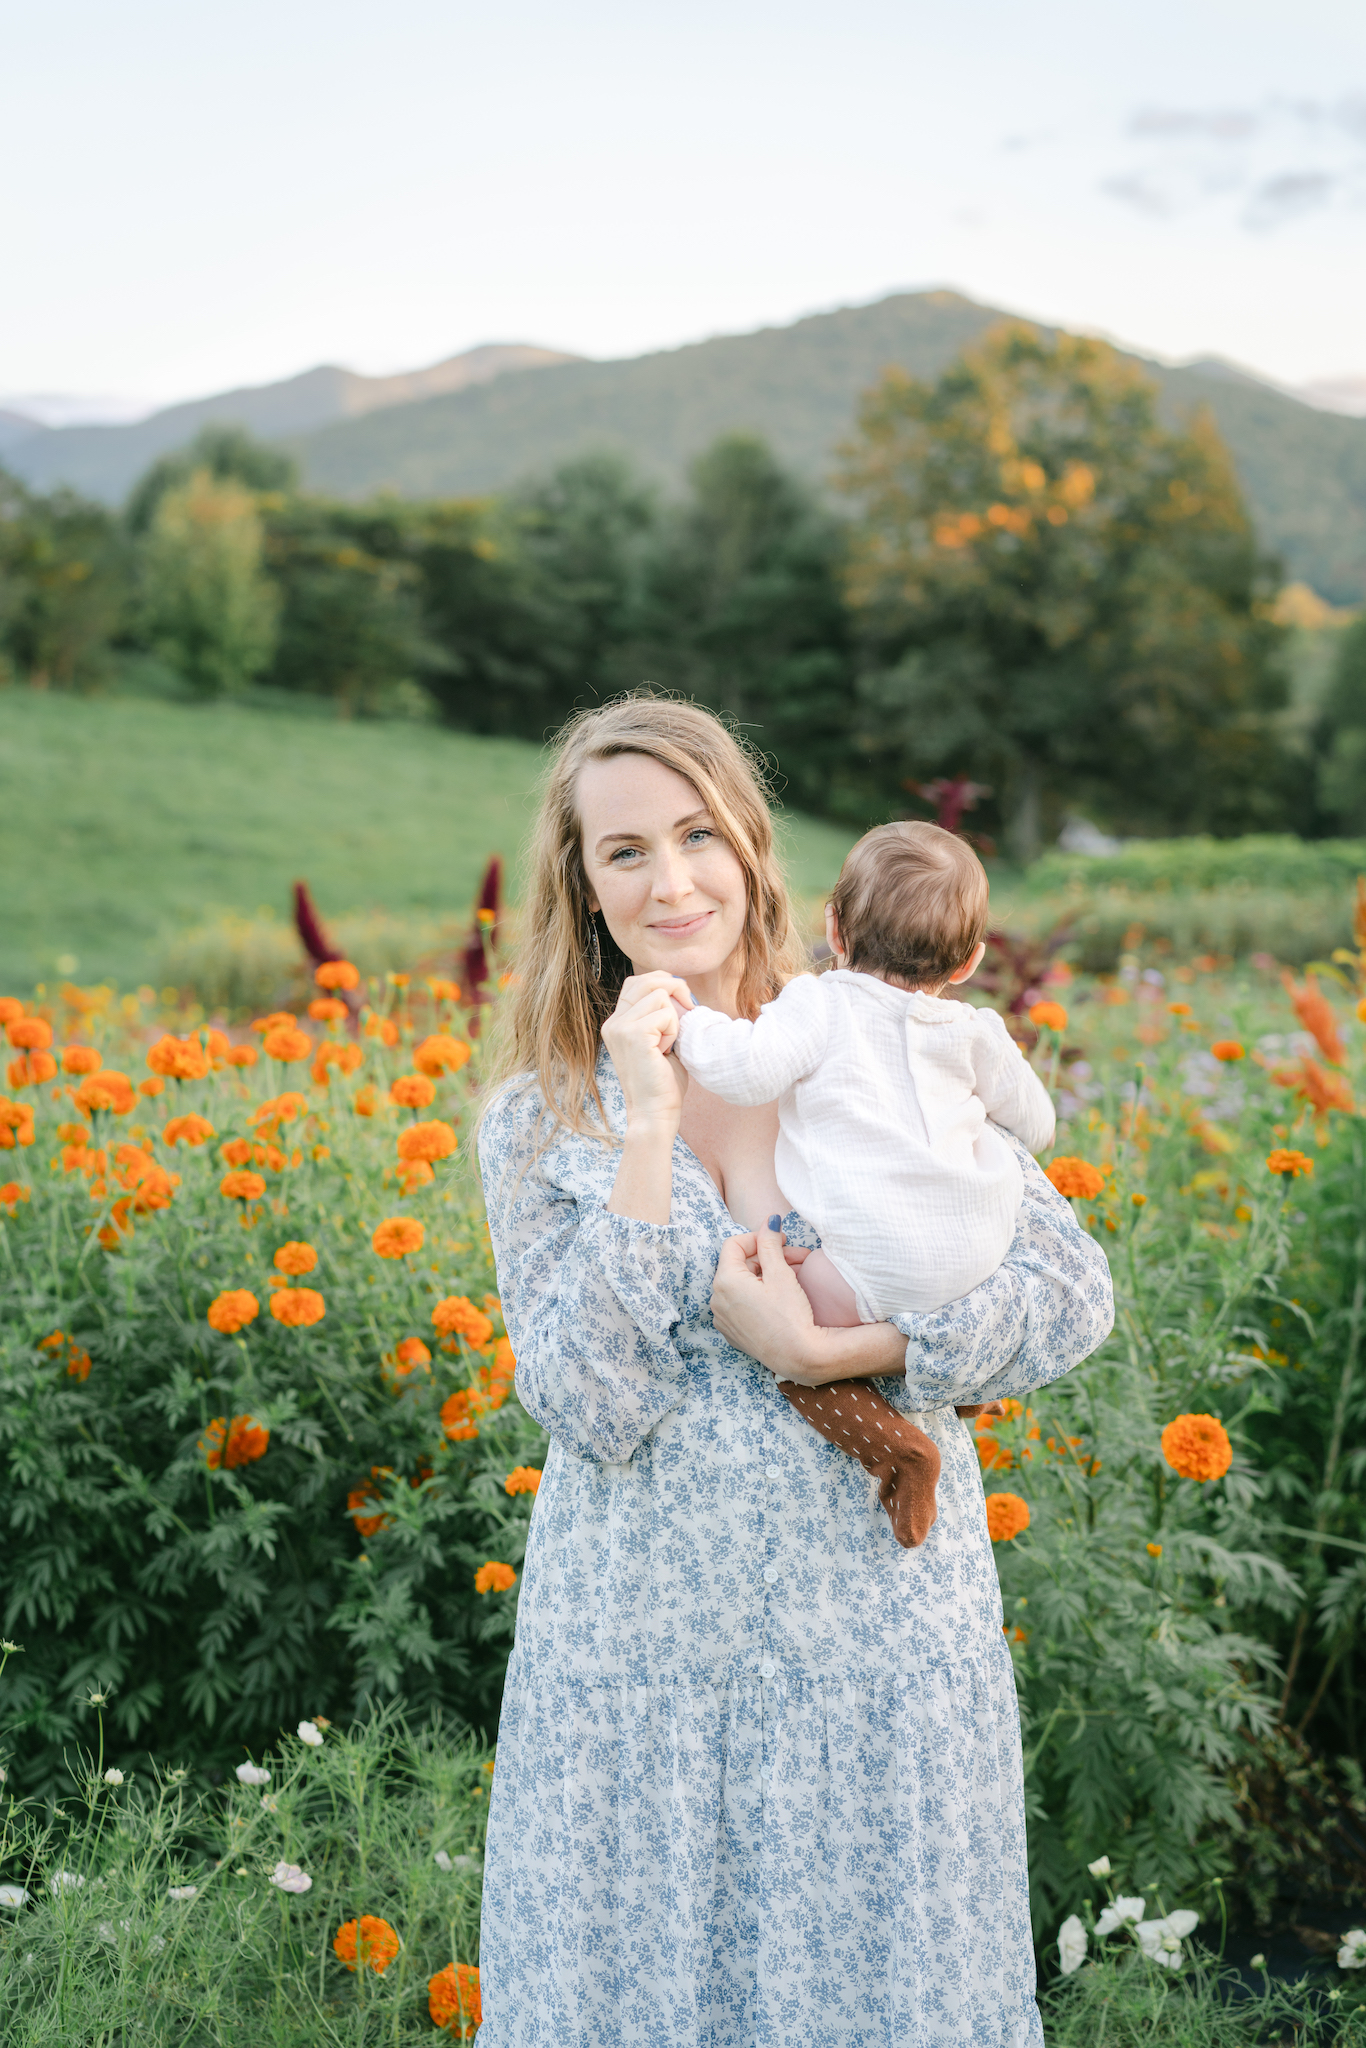 Photo of Mom holding baby with mountains and flowers in the background by Lauren Sosler Photography.